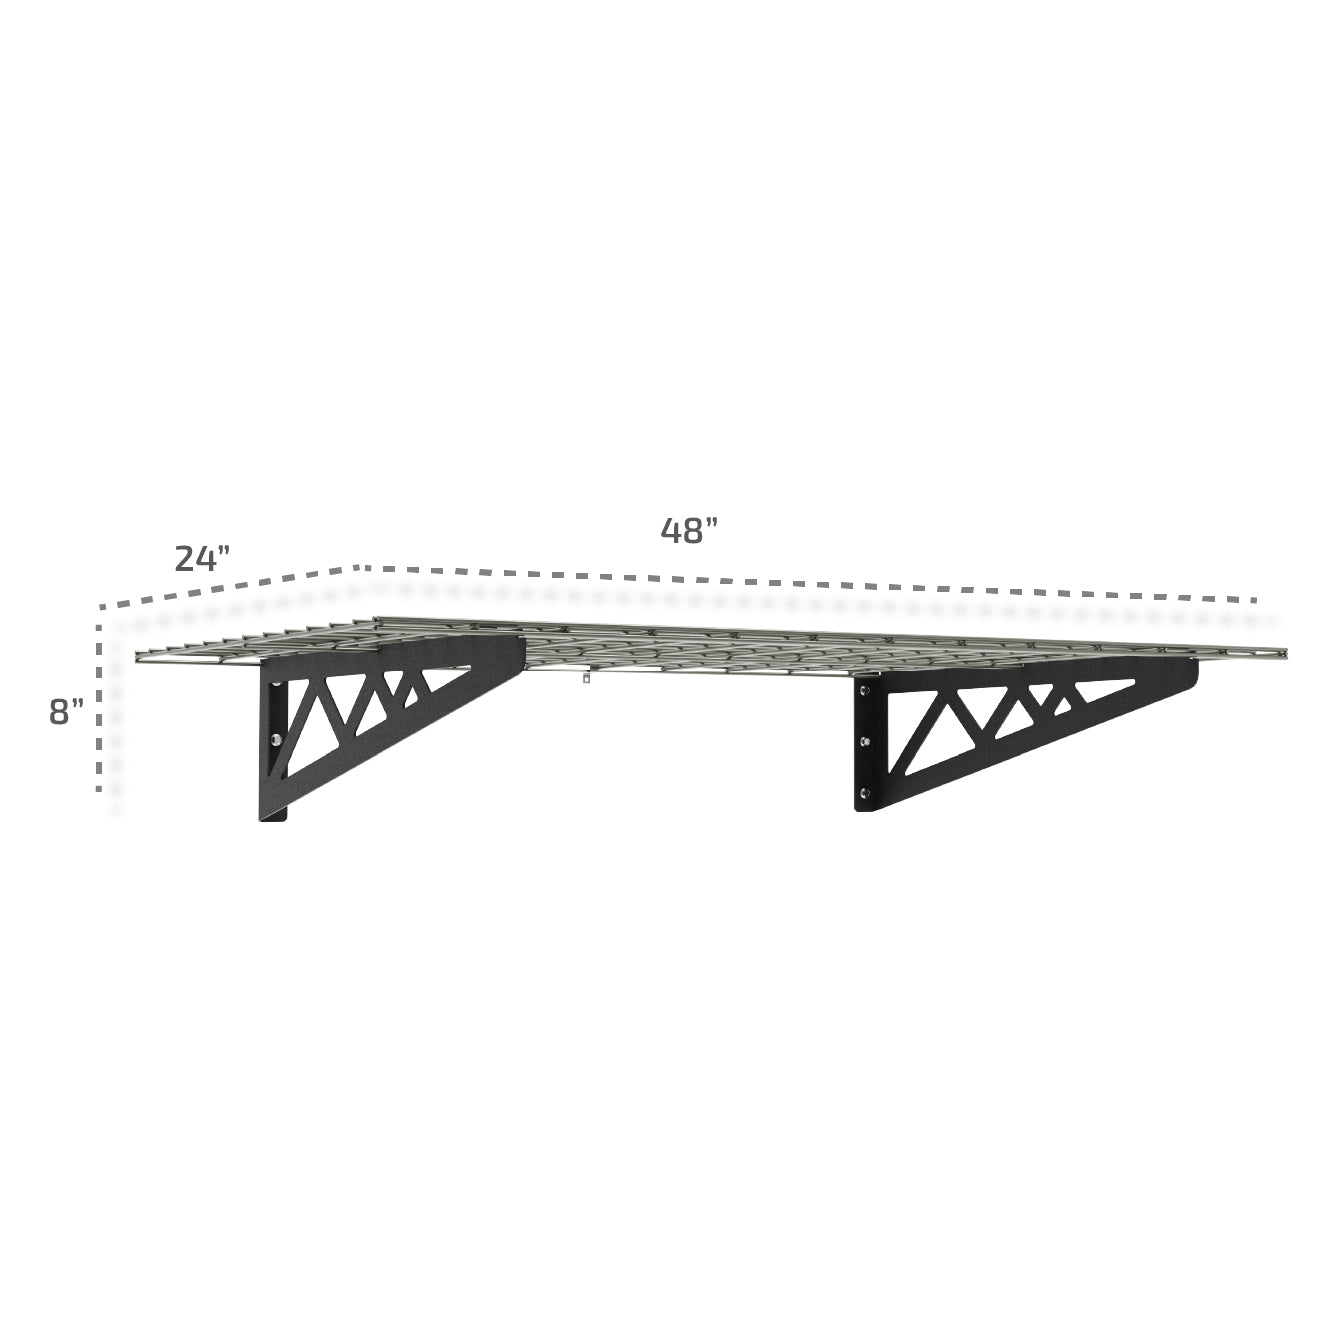 24’ x 48’ Wall Shelves Combo (Four Pack with Hooks)